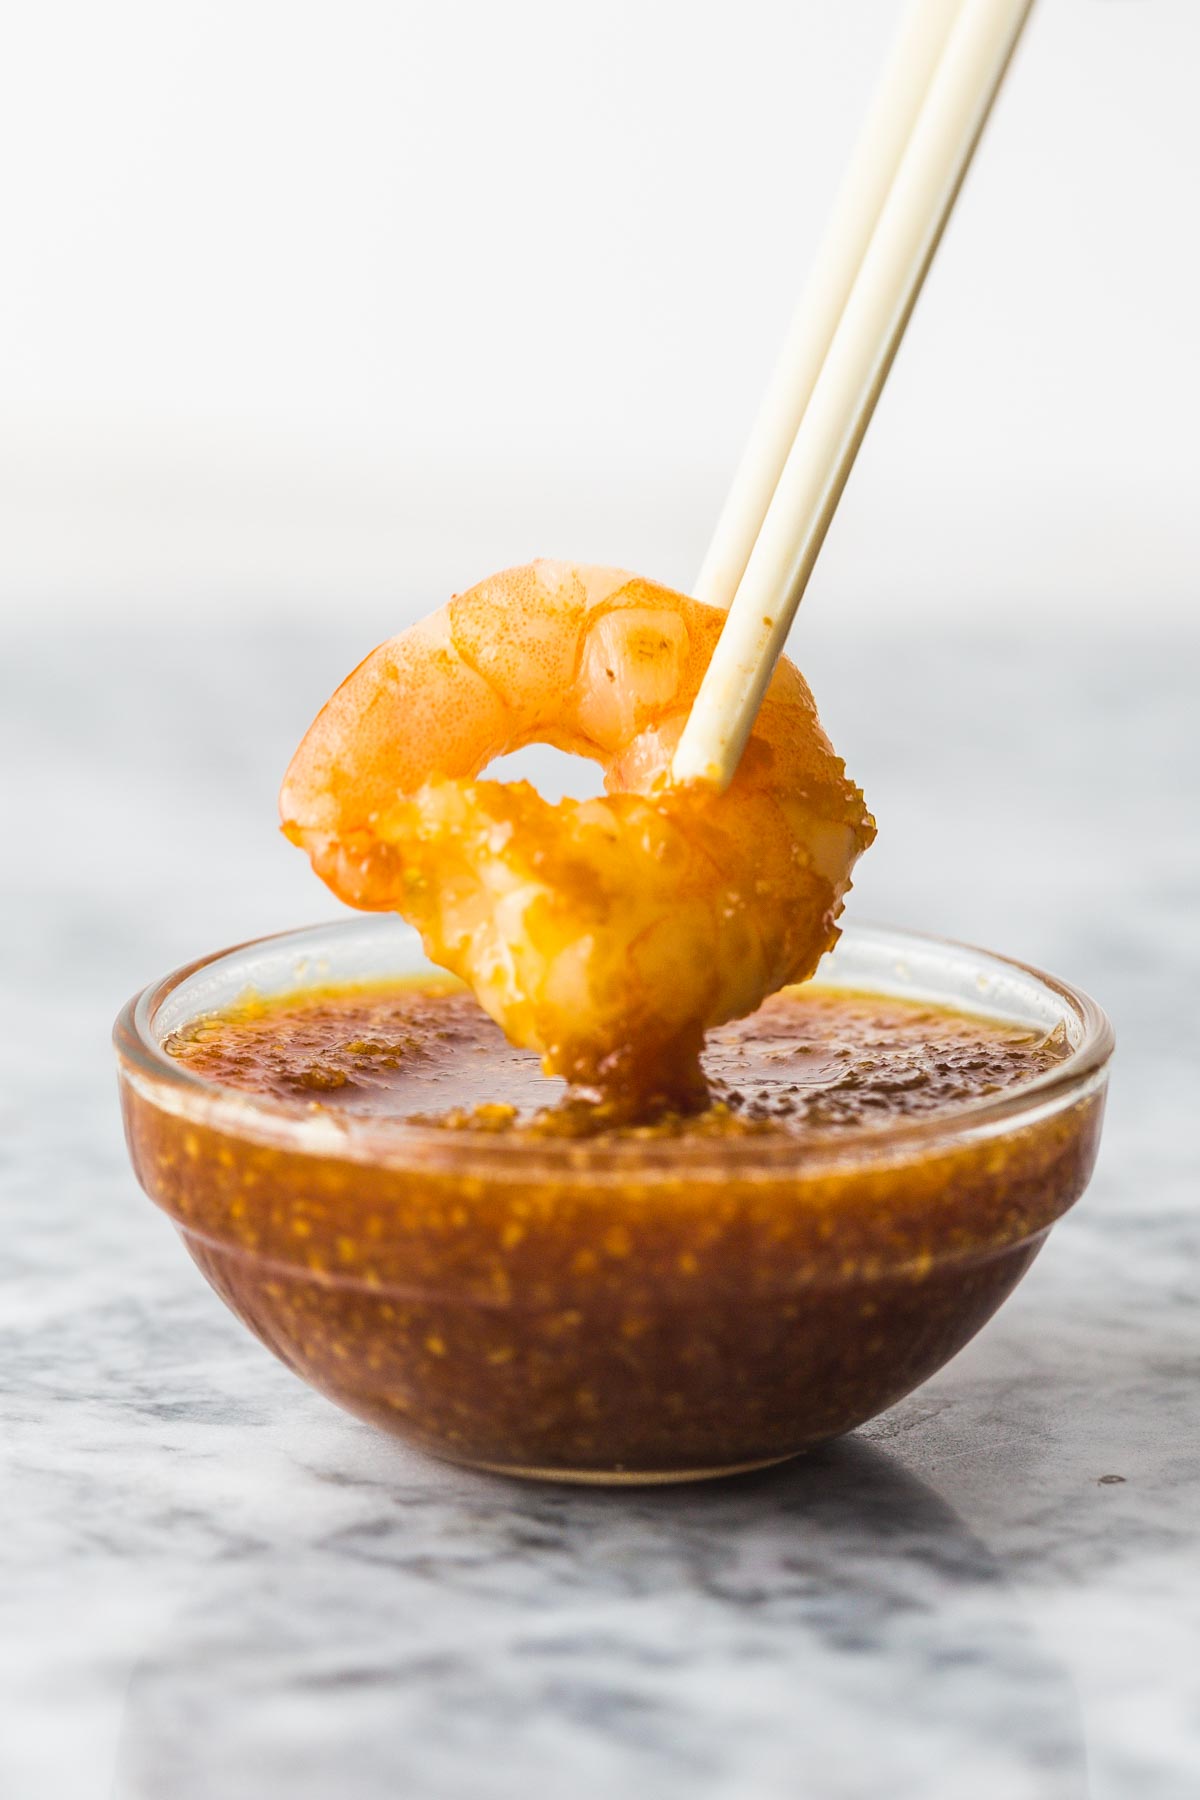 Dipping a shrimp with chopsticks into the ginger sauce